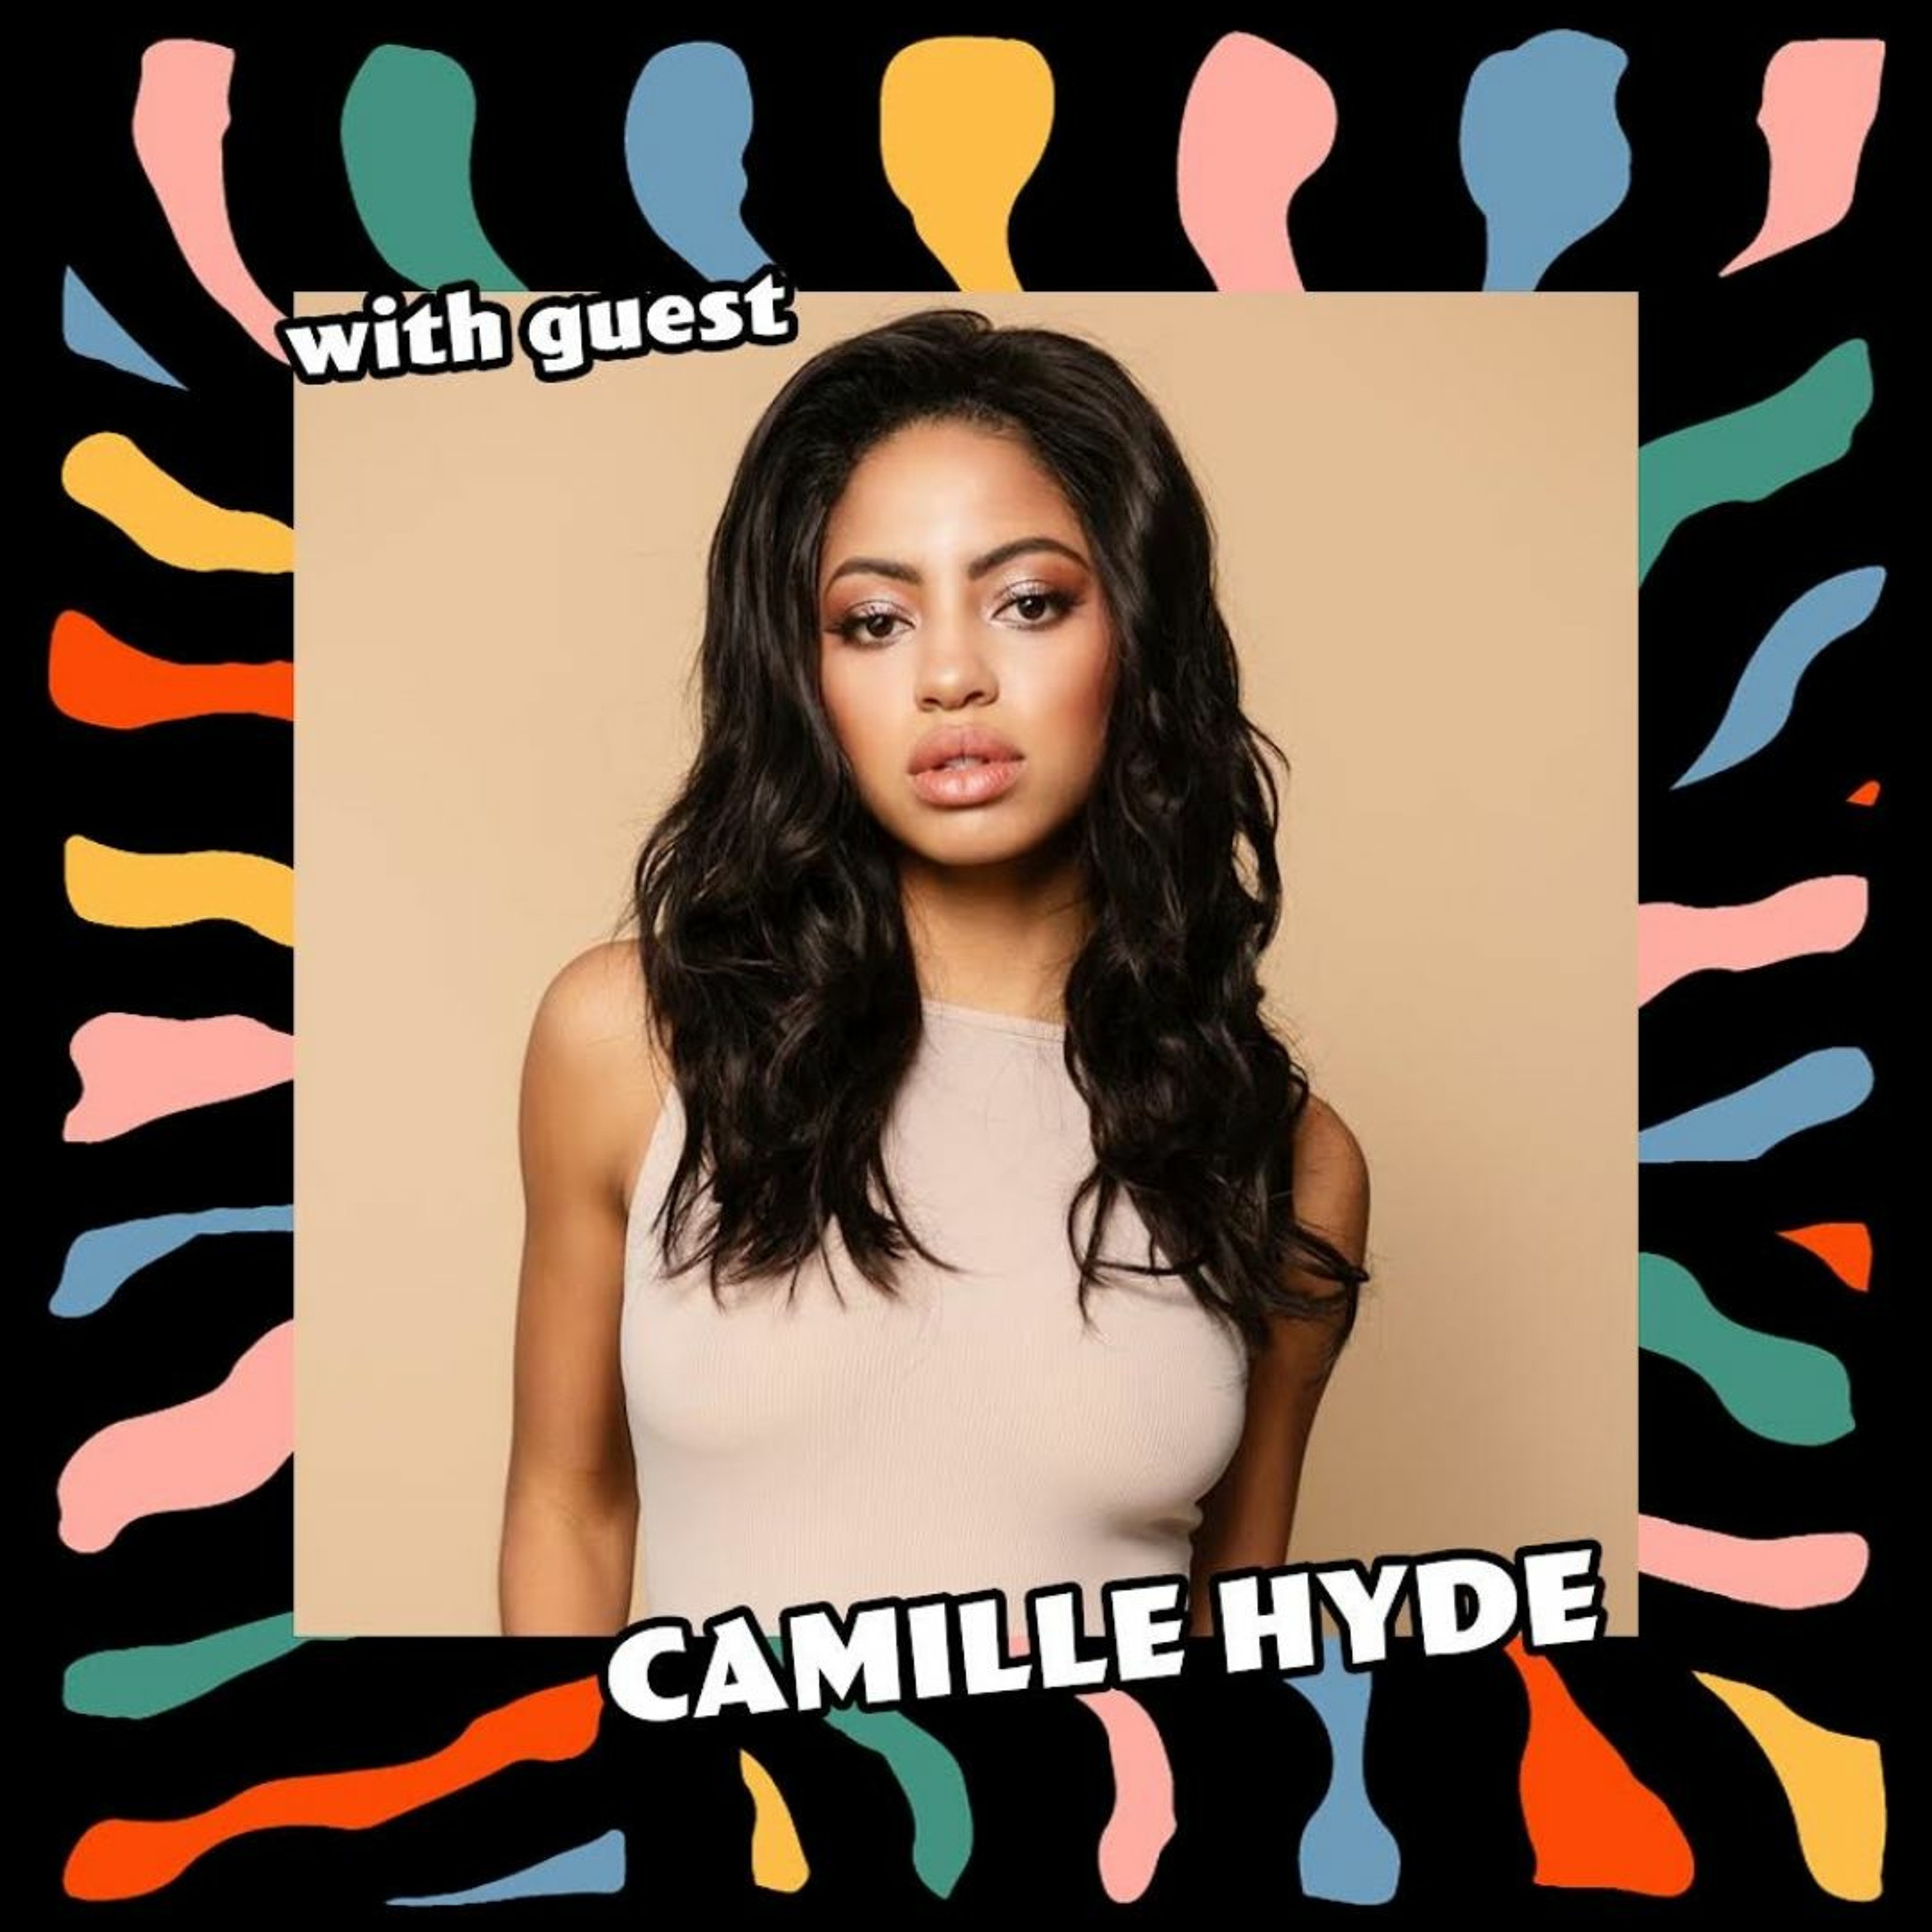 Anthony Interviews Camille Hyde